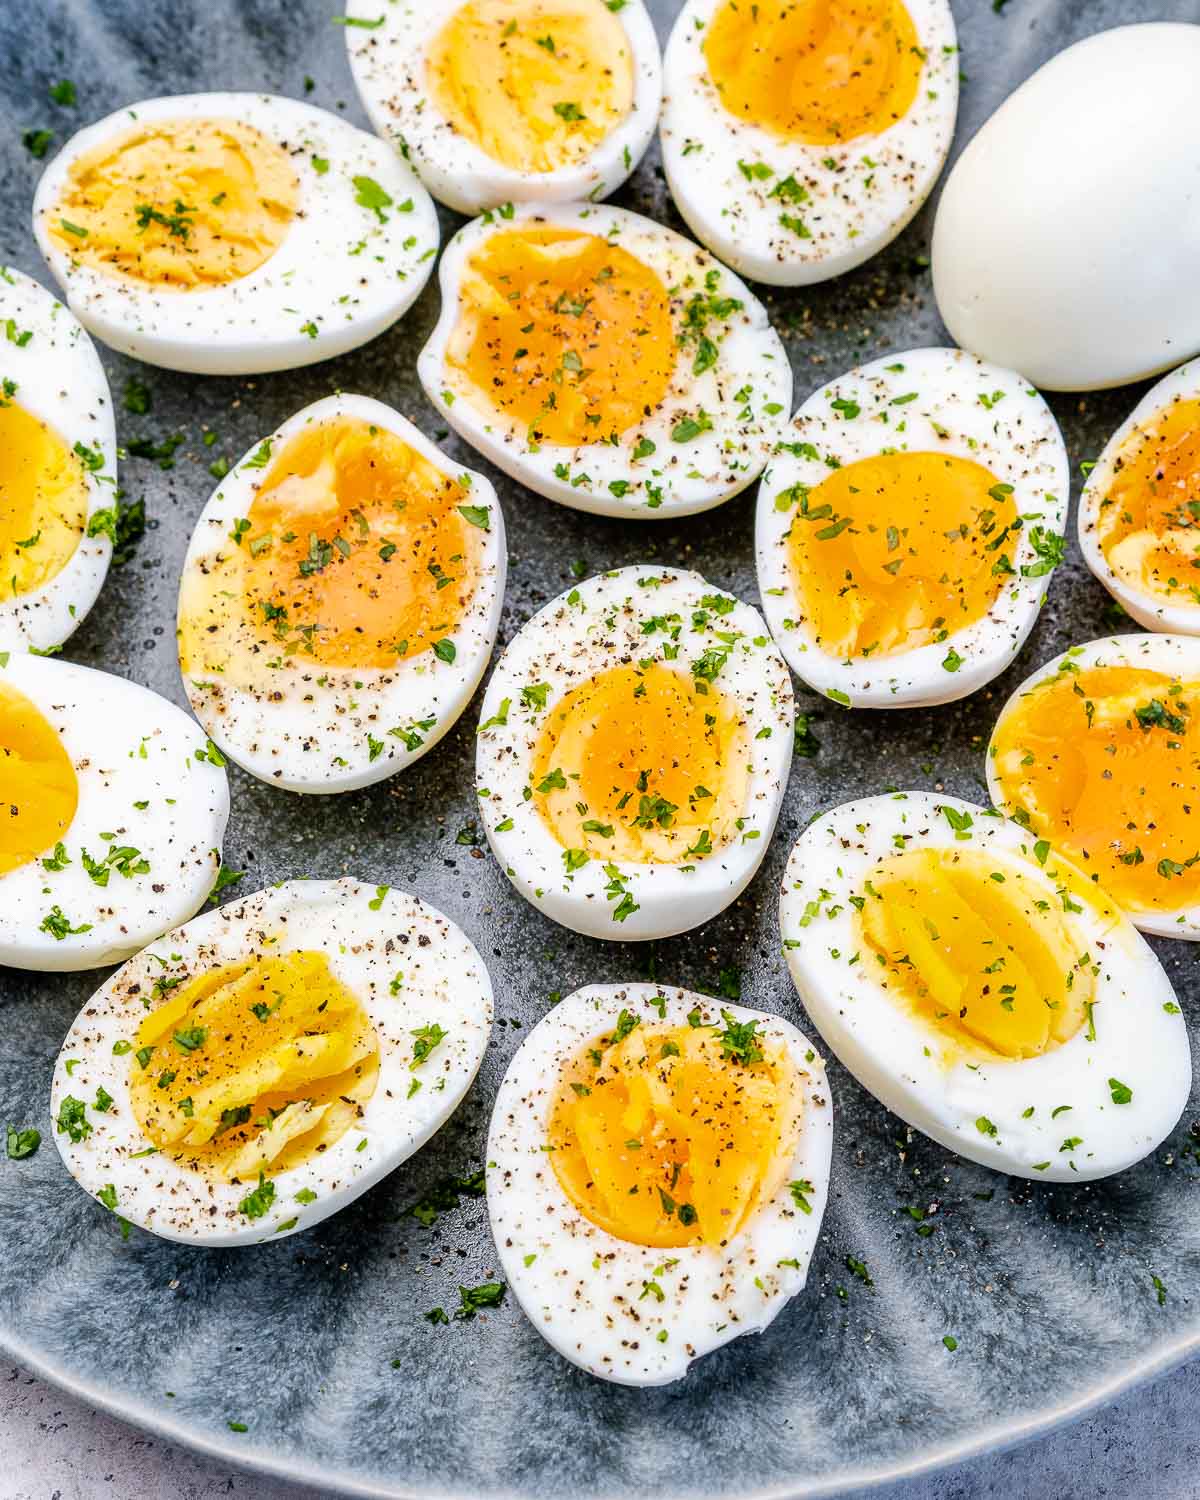 https://cleanfoodcrush.com/wp-content/uploads/2021/03/How-to-Make-Perfectly-Boiled-Eggs-Clean-Eating-Recipe-Clean-Food-Crush.jpg